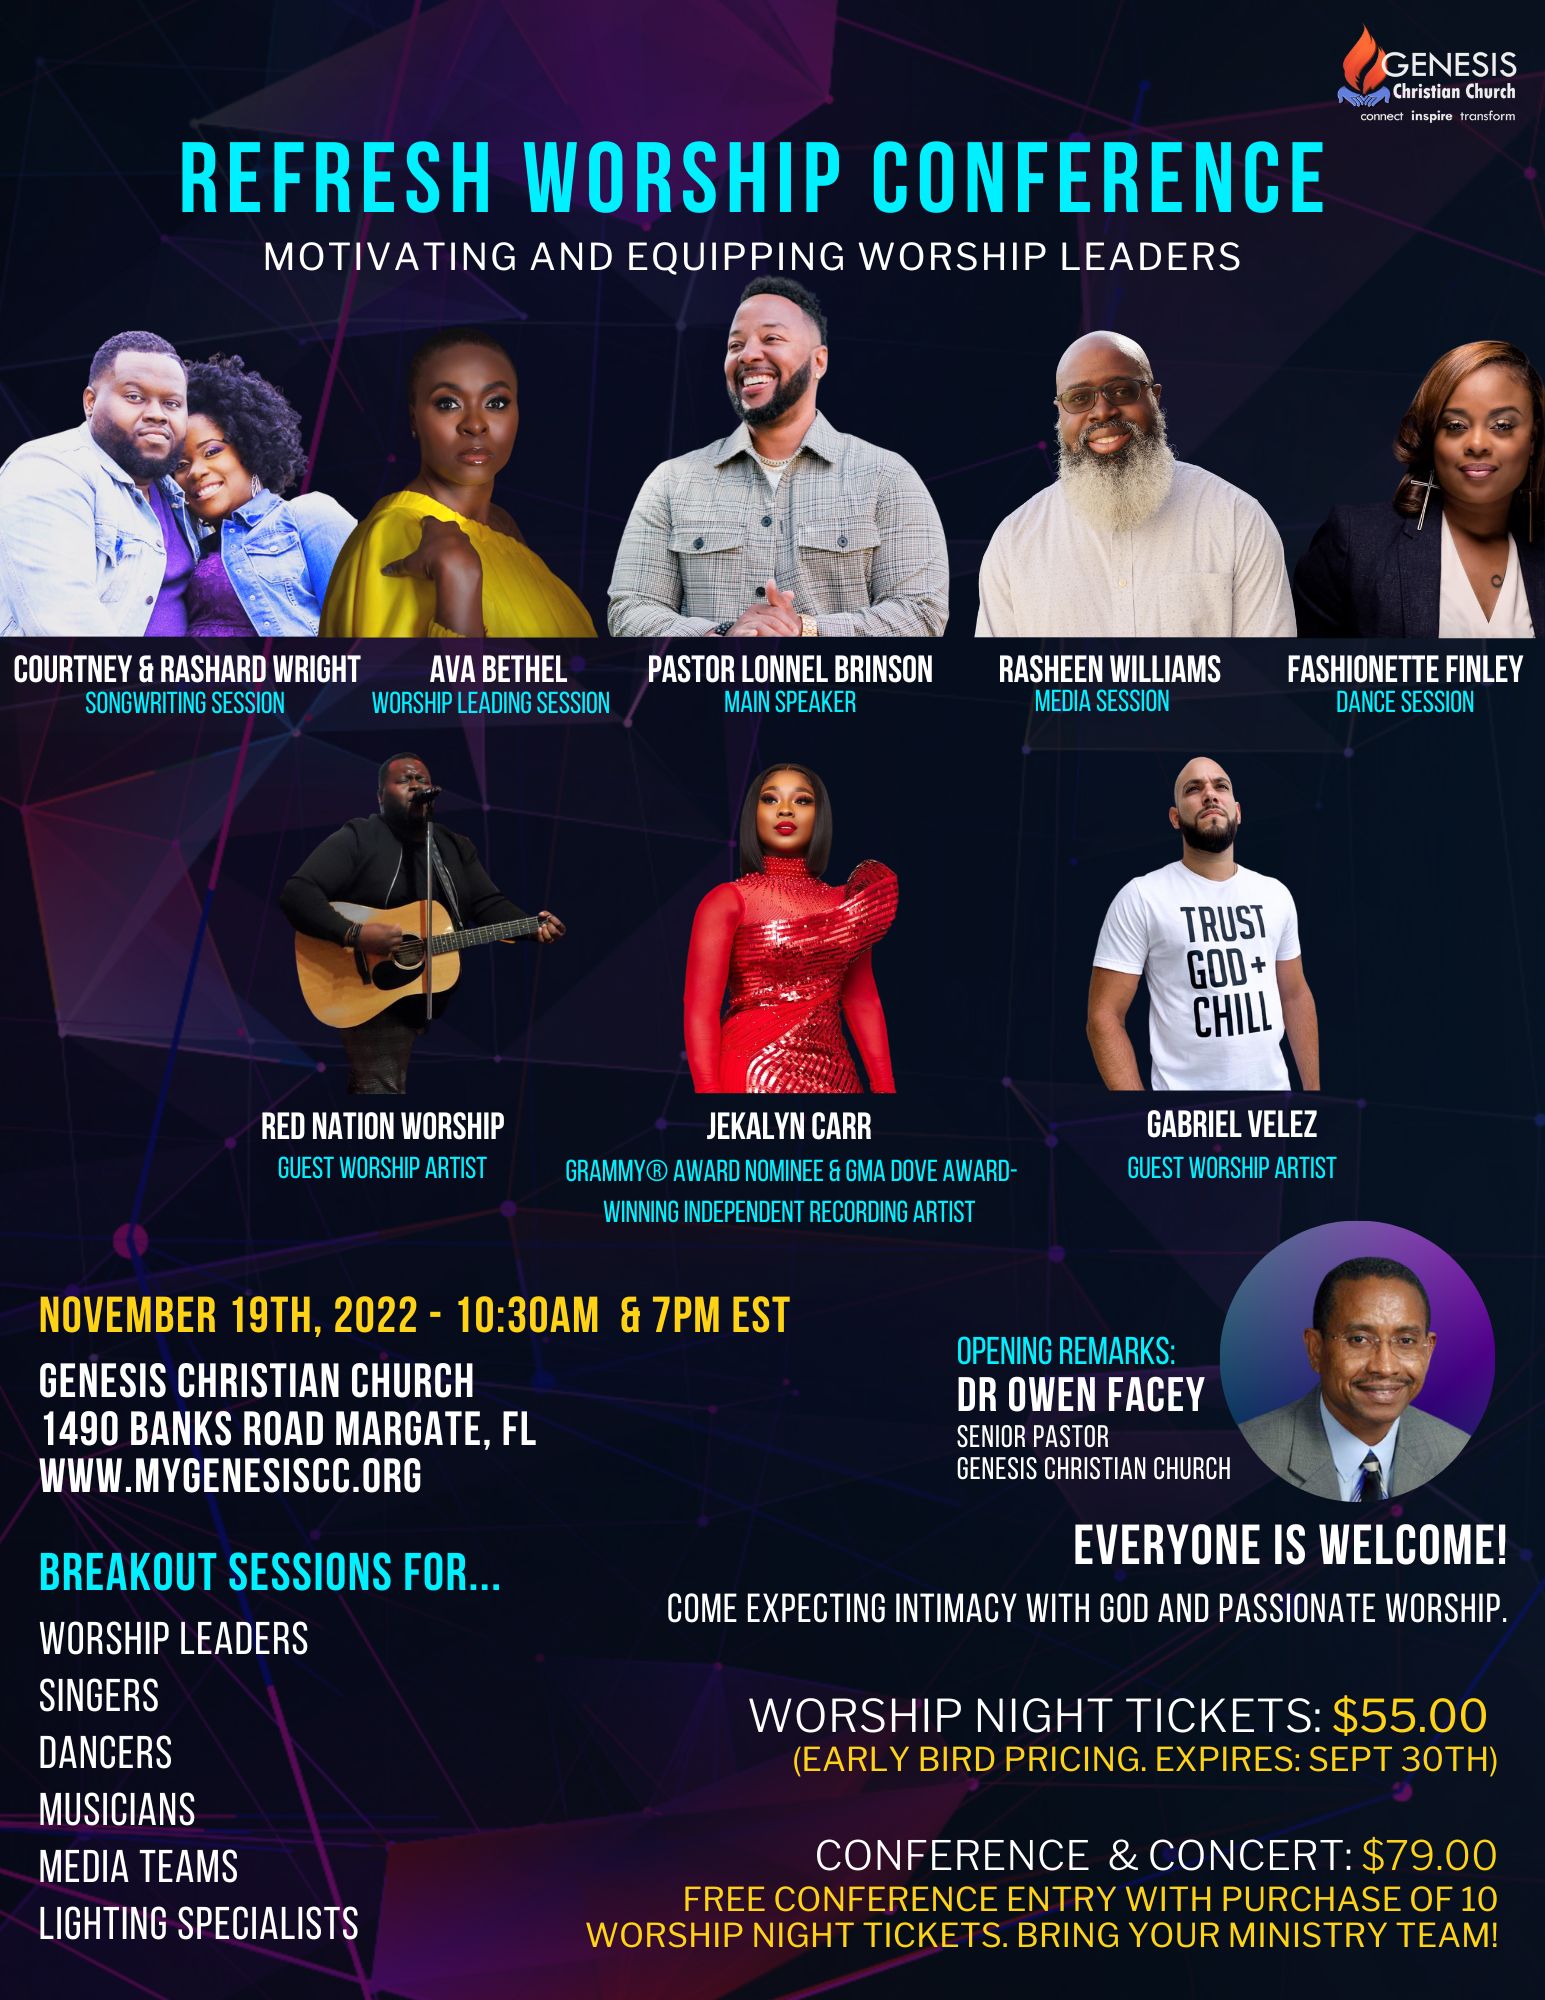 Promotional Flyer for the Refresh Worship Conference (featuring Jekalyn Carr) on November 19th, 2022 at Genesis Christian Church in Margate, Florida.